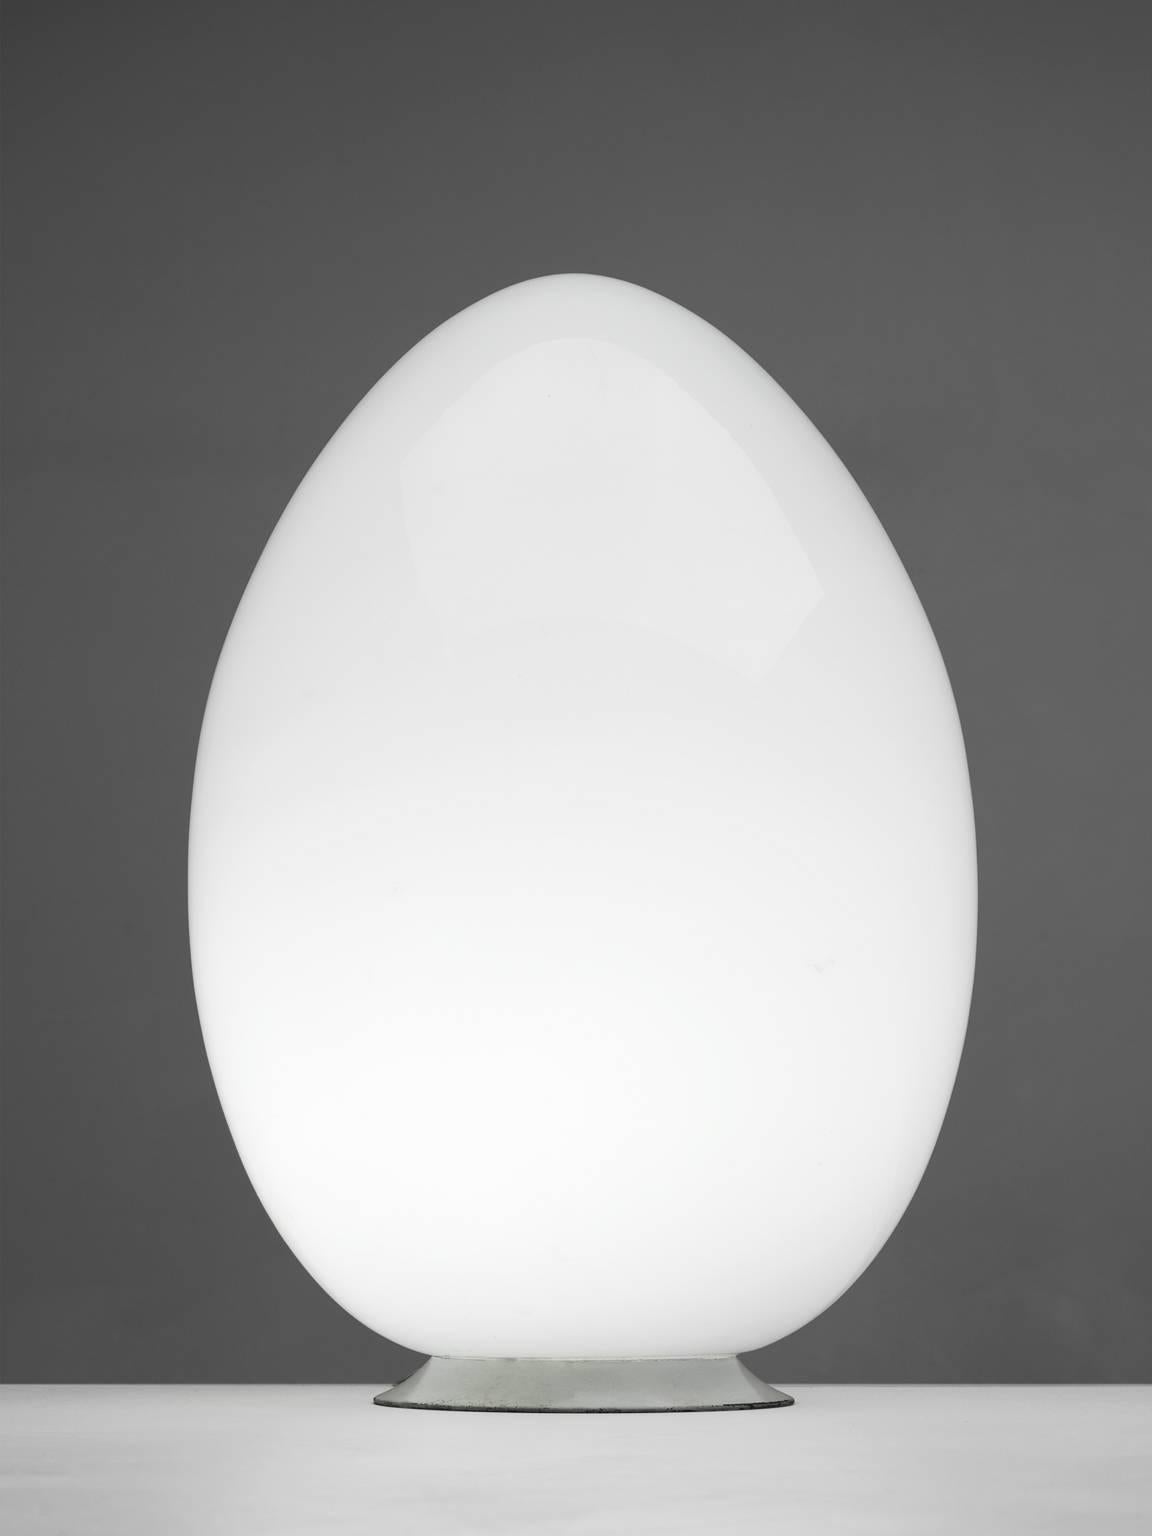 Egg shaped lamp, opaline glass, metal, Italy, 1970s.

This floor or table lamp in Murano glass has an oval form resembling an egg. The opaline white glass gives off a nebulous light partition. The lamp is both playful and functional at the same